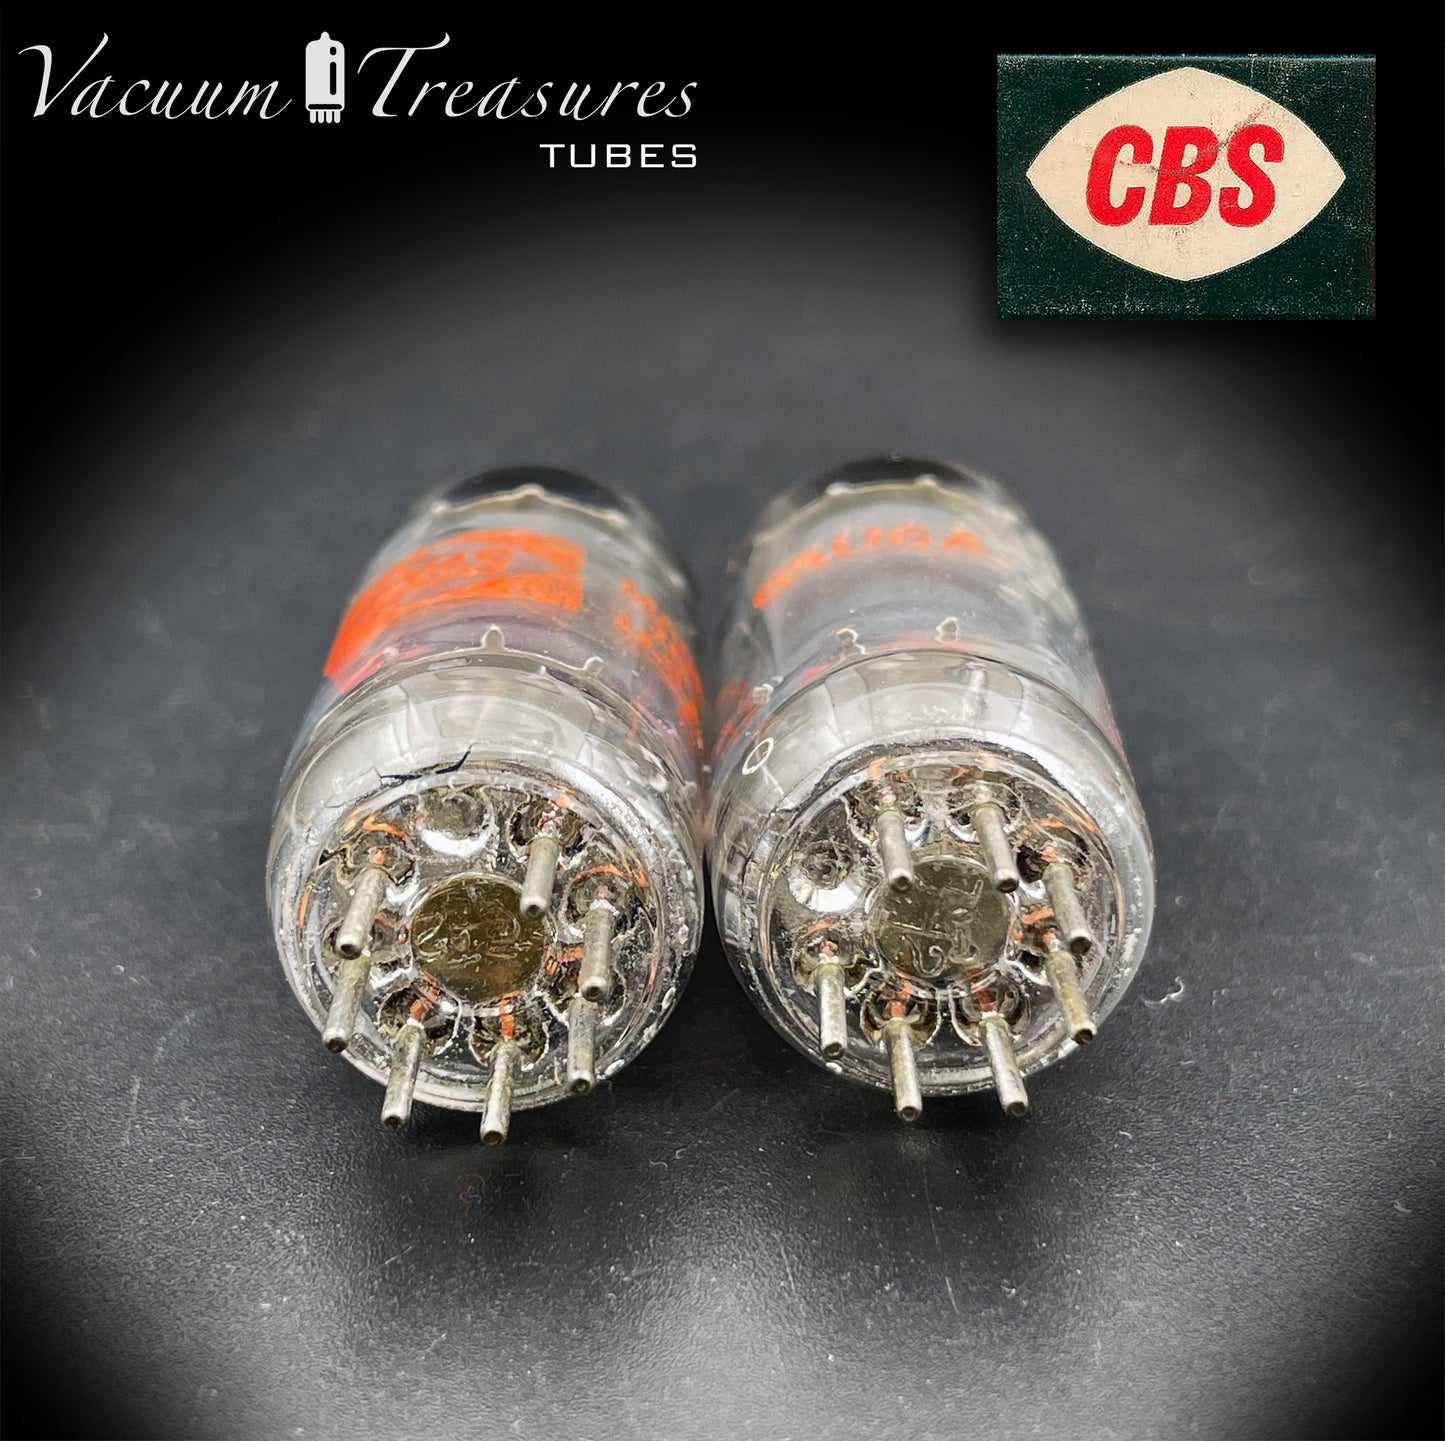 6AU6A ( EF94 6J4 ) NOS NIB GE for CBS Gray Plates Square Getter Tested Tube MADE IN USA '61